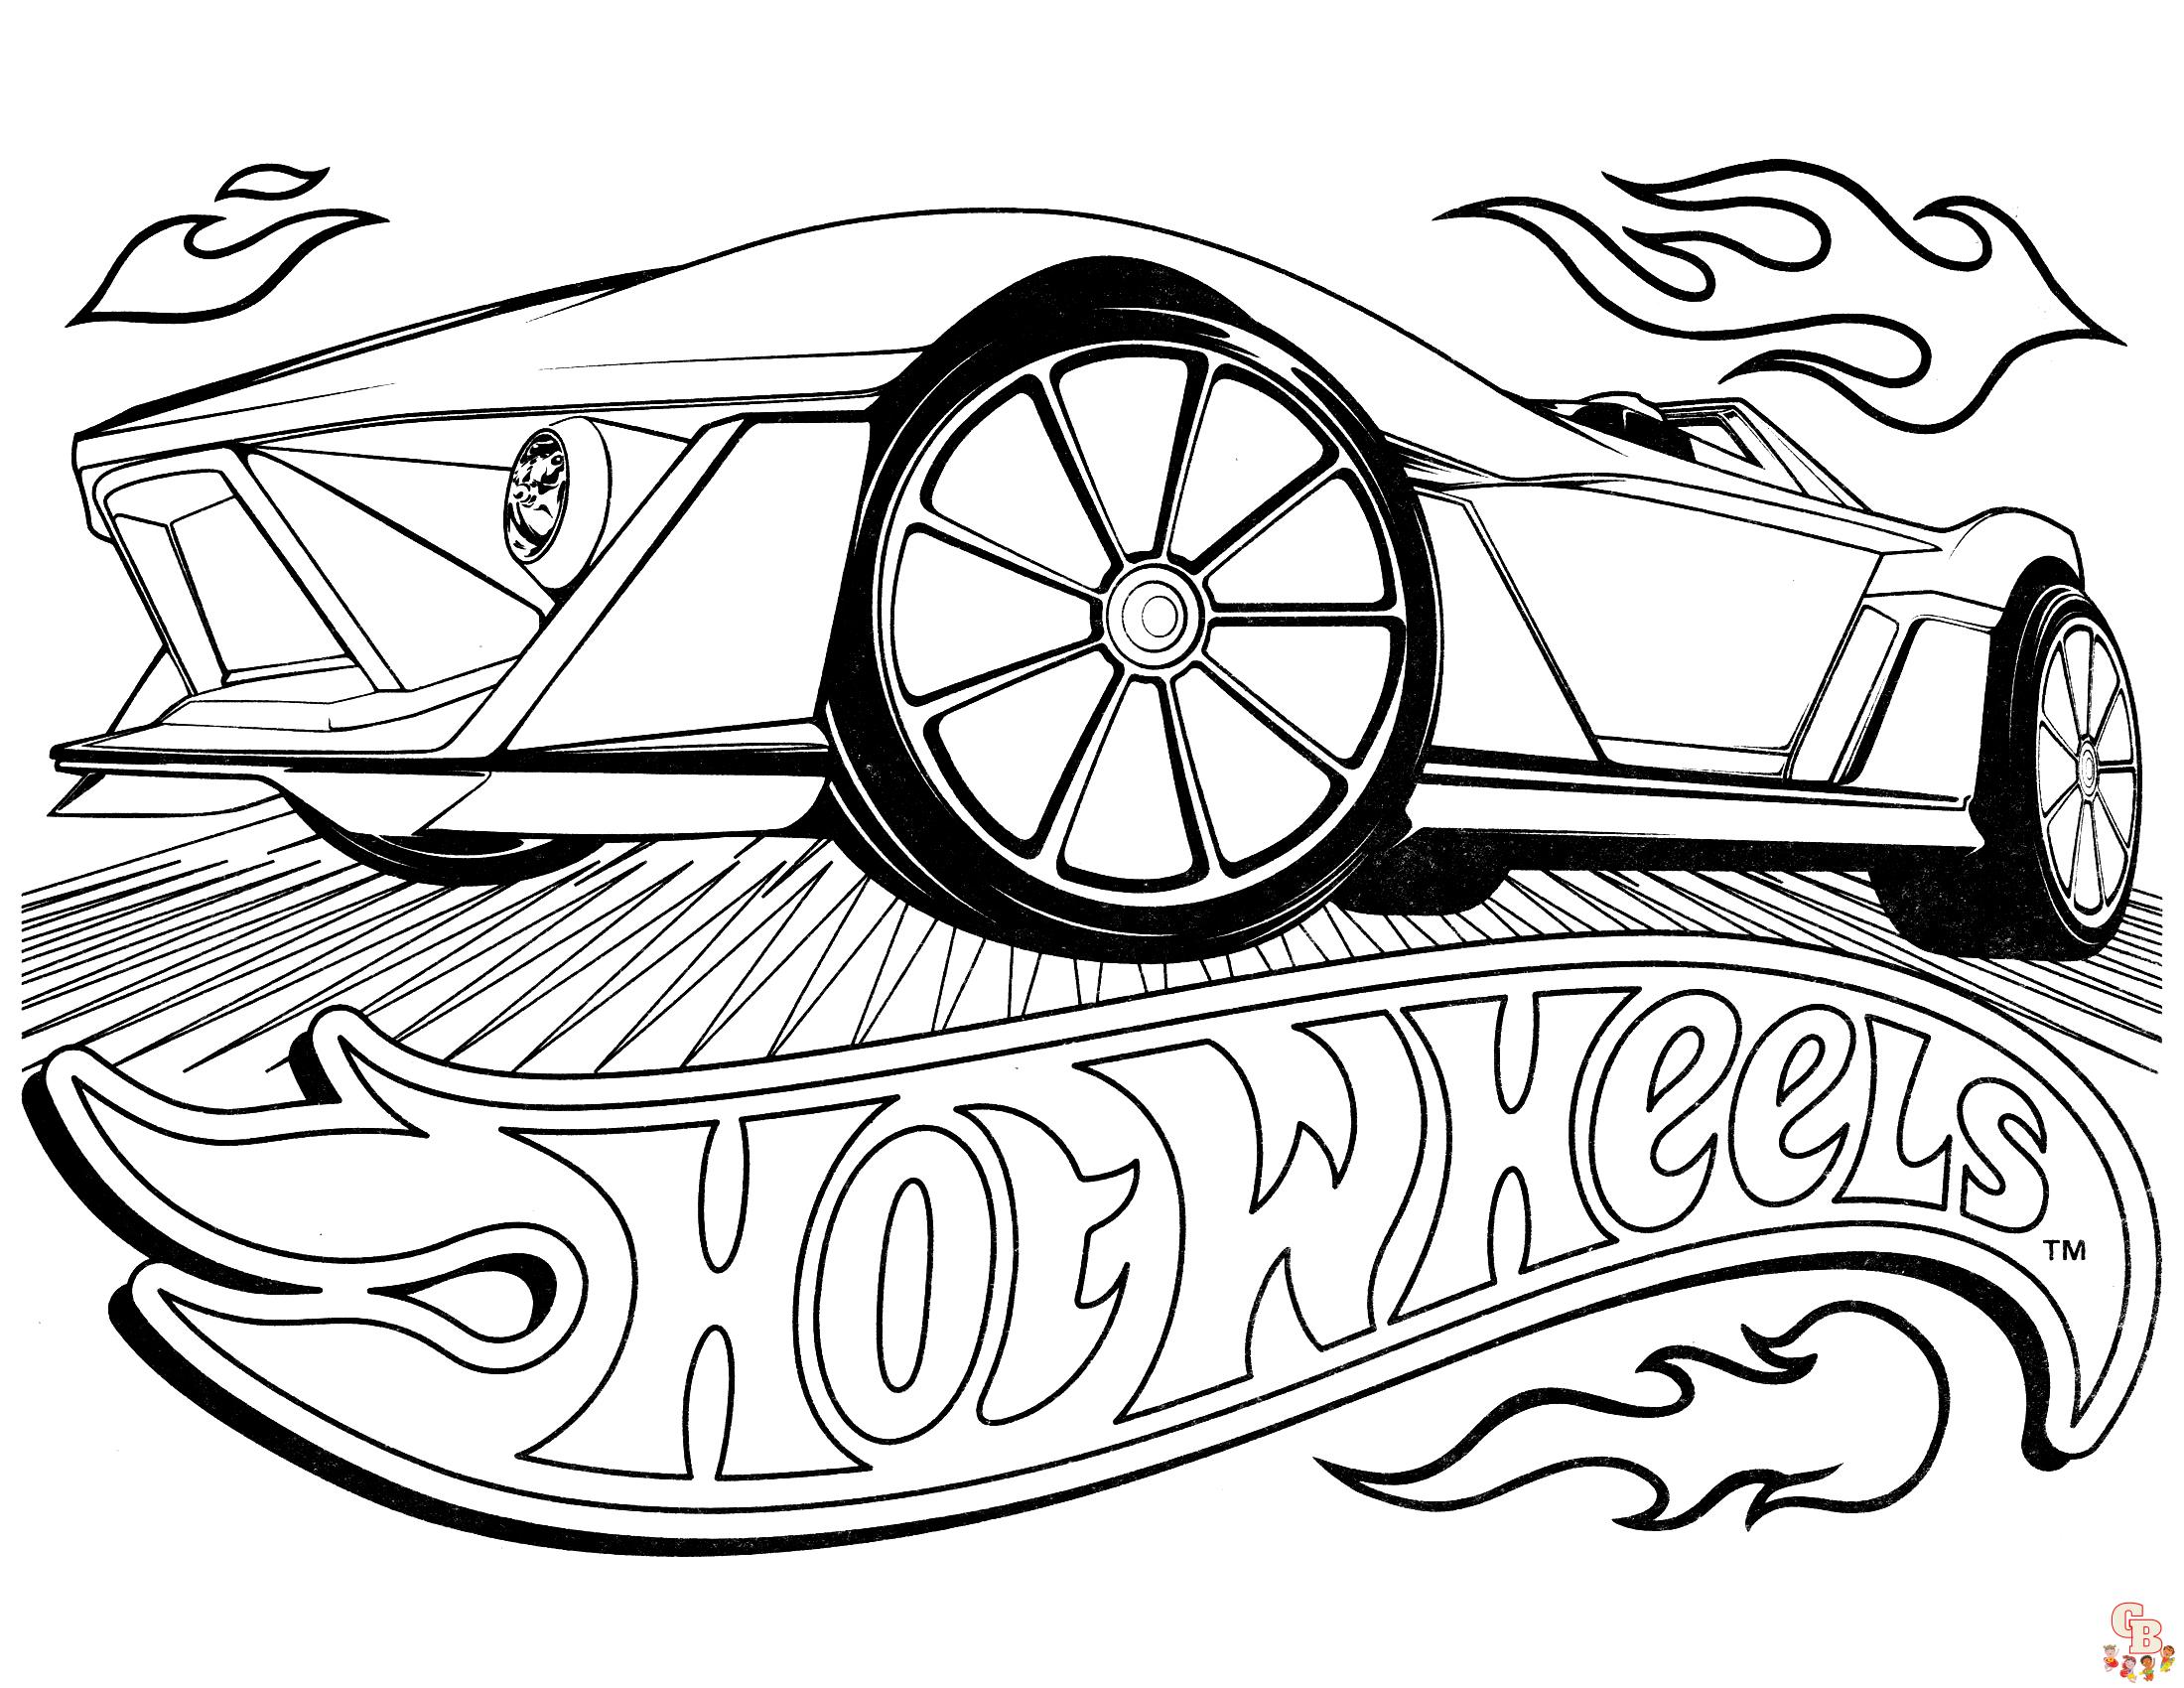 Hot wheels coloring pages fun and free printable sheets for kids